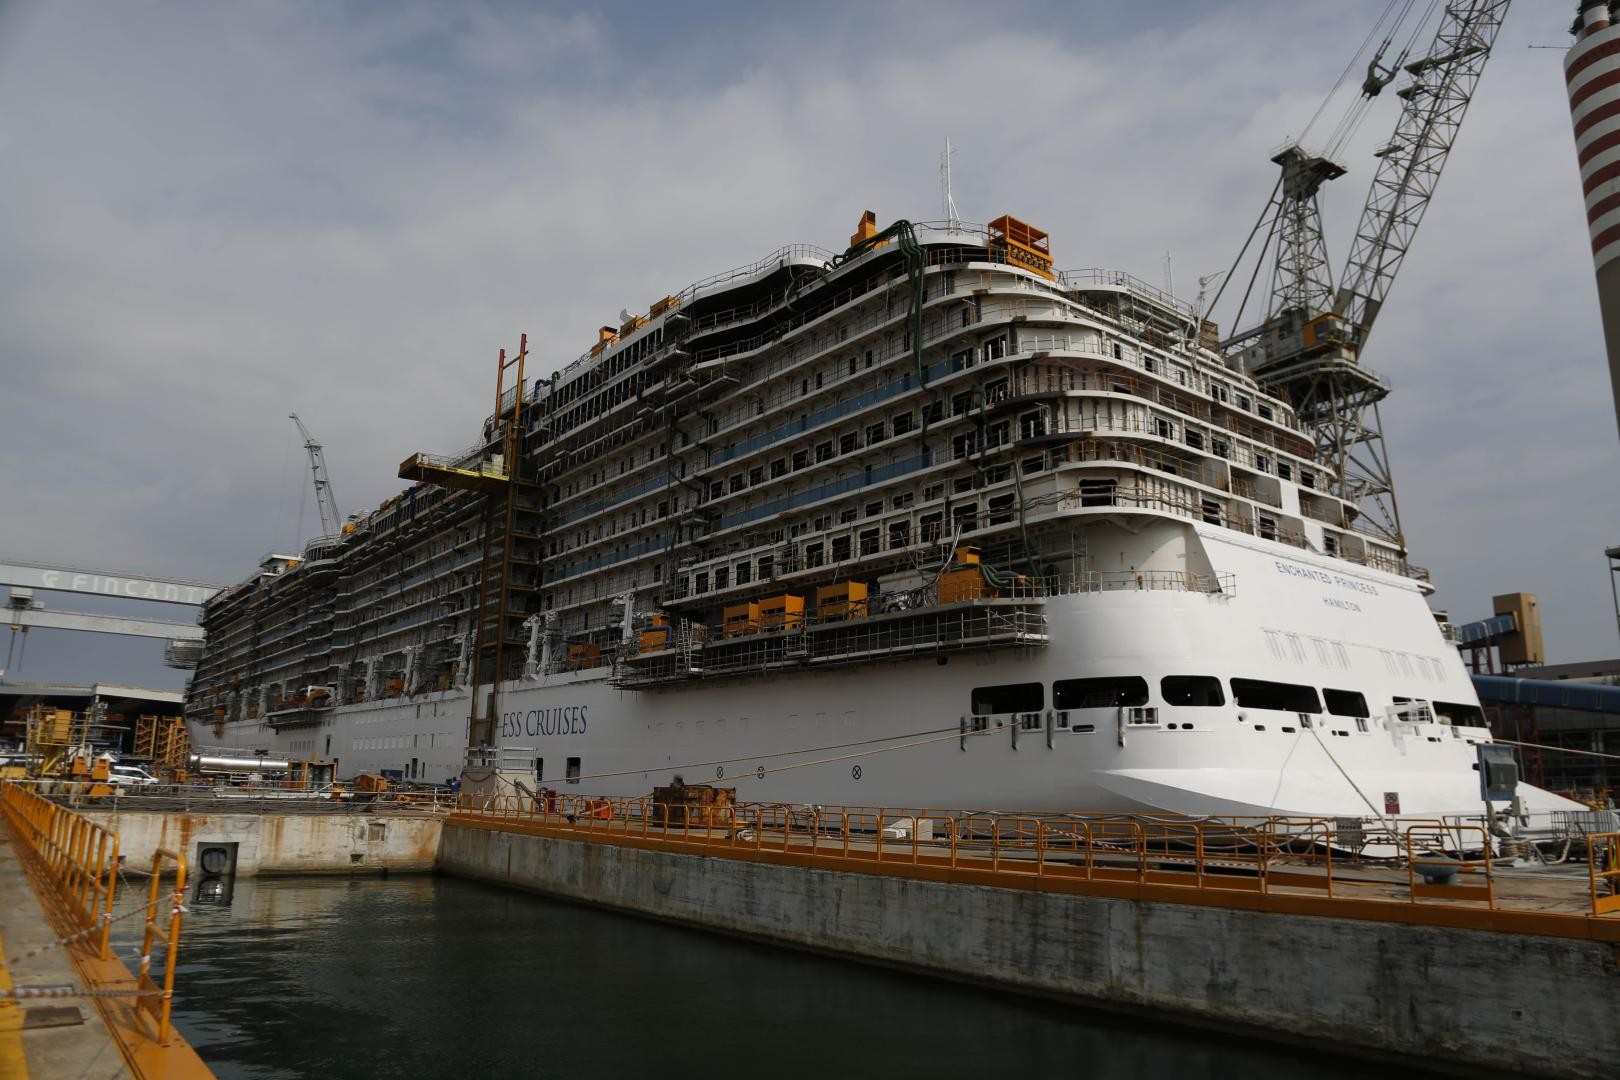 Enchanted Princess, the fifth Royal-class ship built for the ship operator Princess Cruises, a brand within Carnival Corporation, floated out today at Fincantieri’s shipyard in Monfalcone